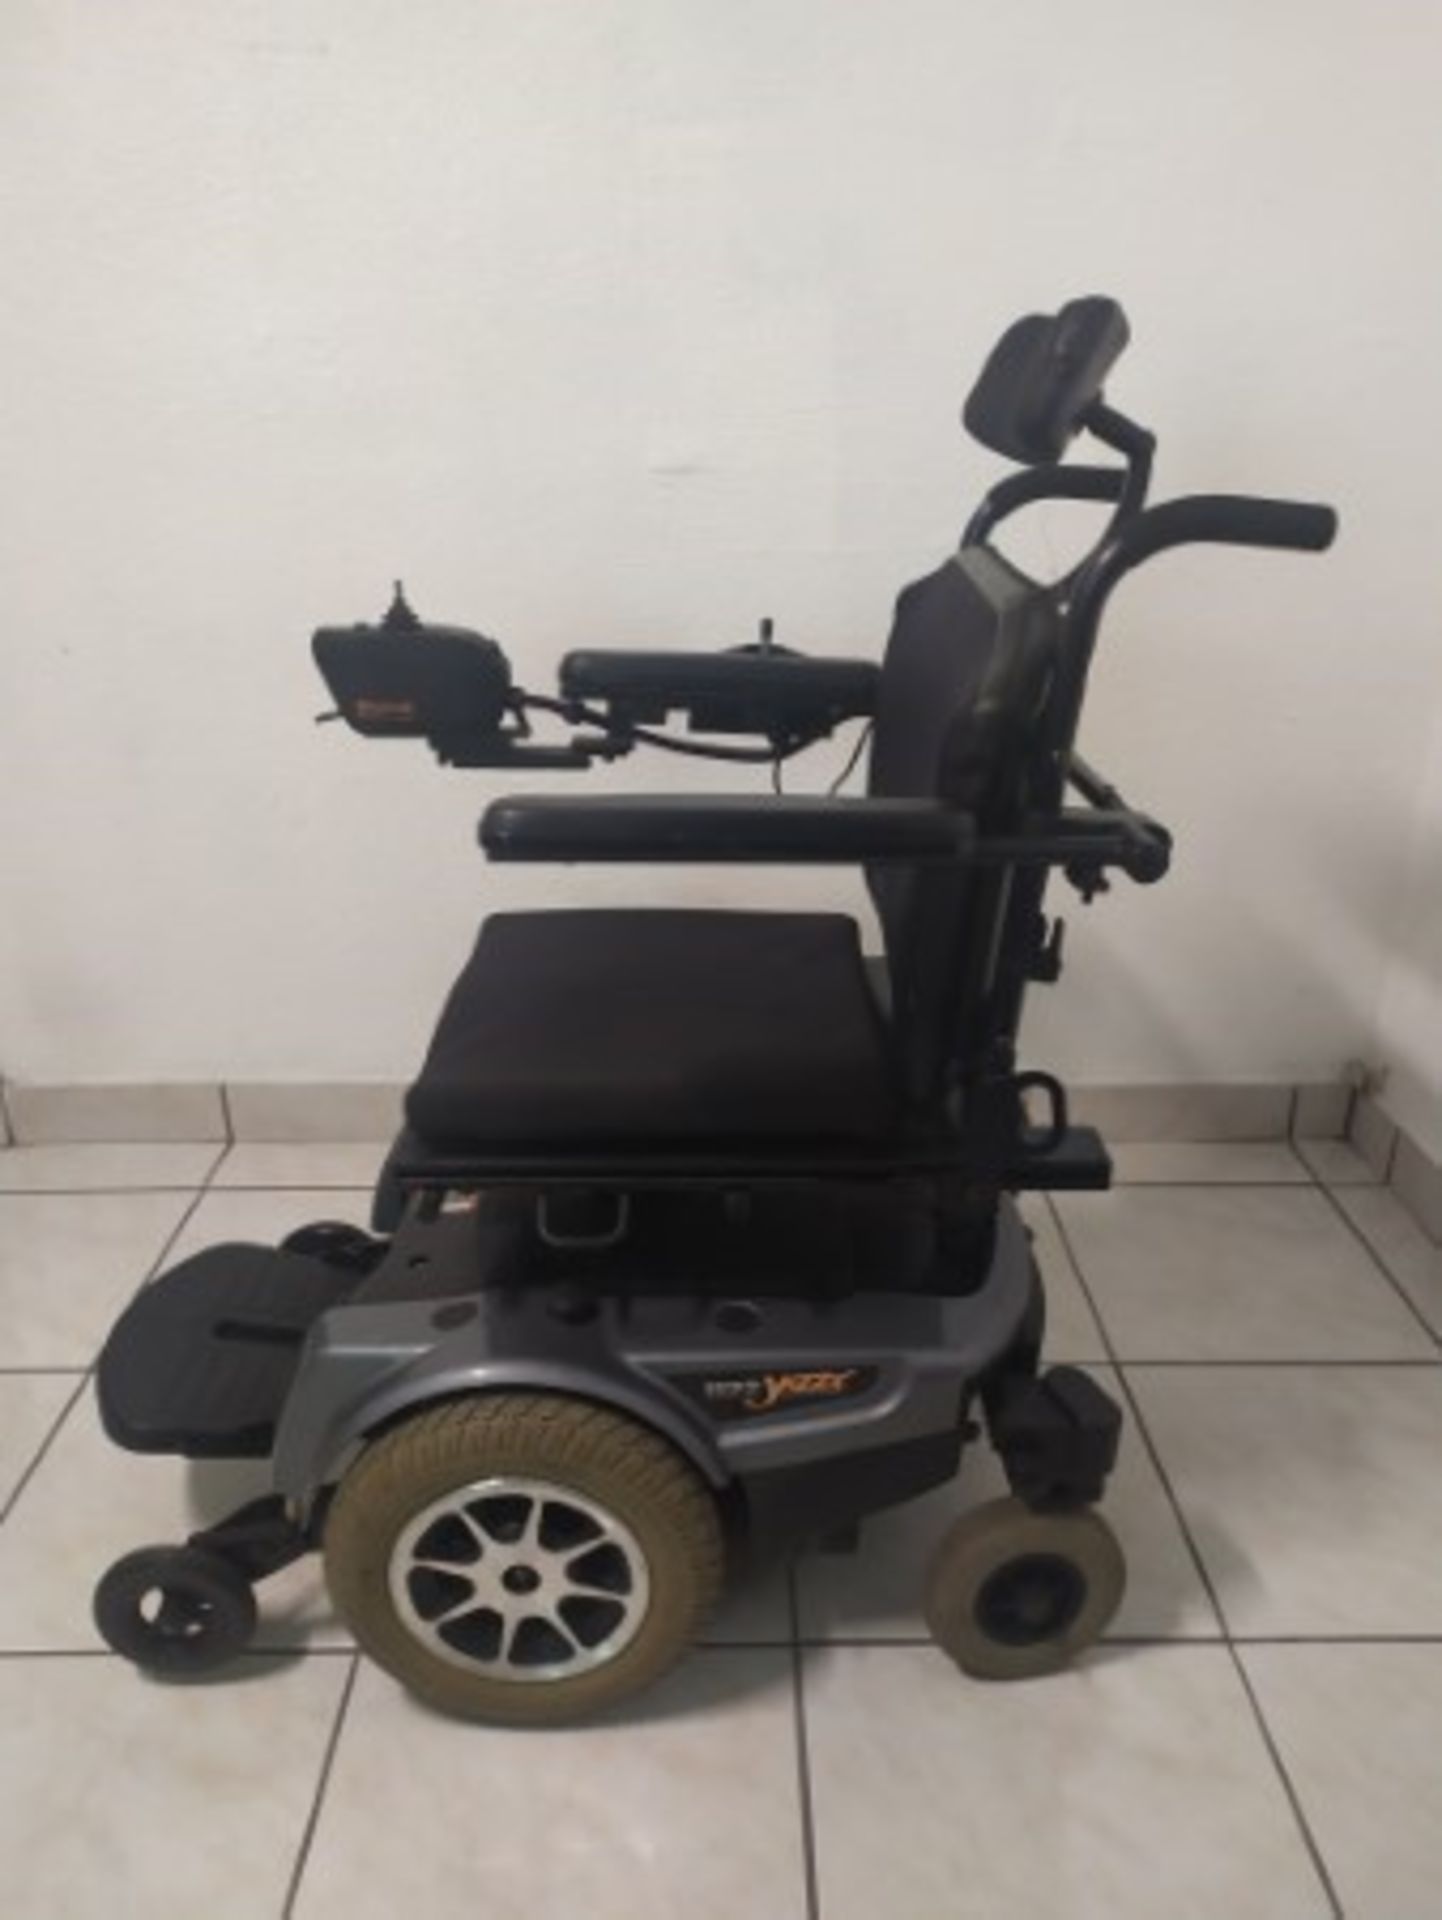 2008 PRIDE JAZZY 1122 6-WHEEL REHAB POWER CHAIR WITH SEAT WITH RAISE & LOWER FEATURES - GRAY - 300LB - Image 2 of 5